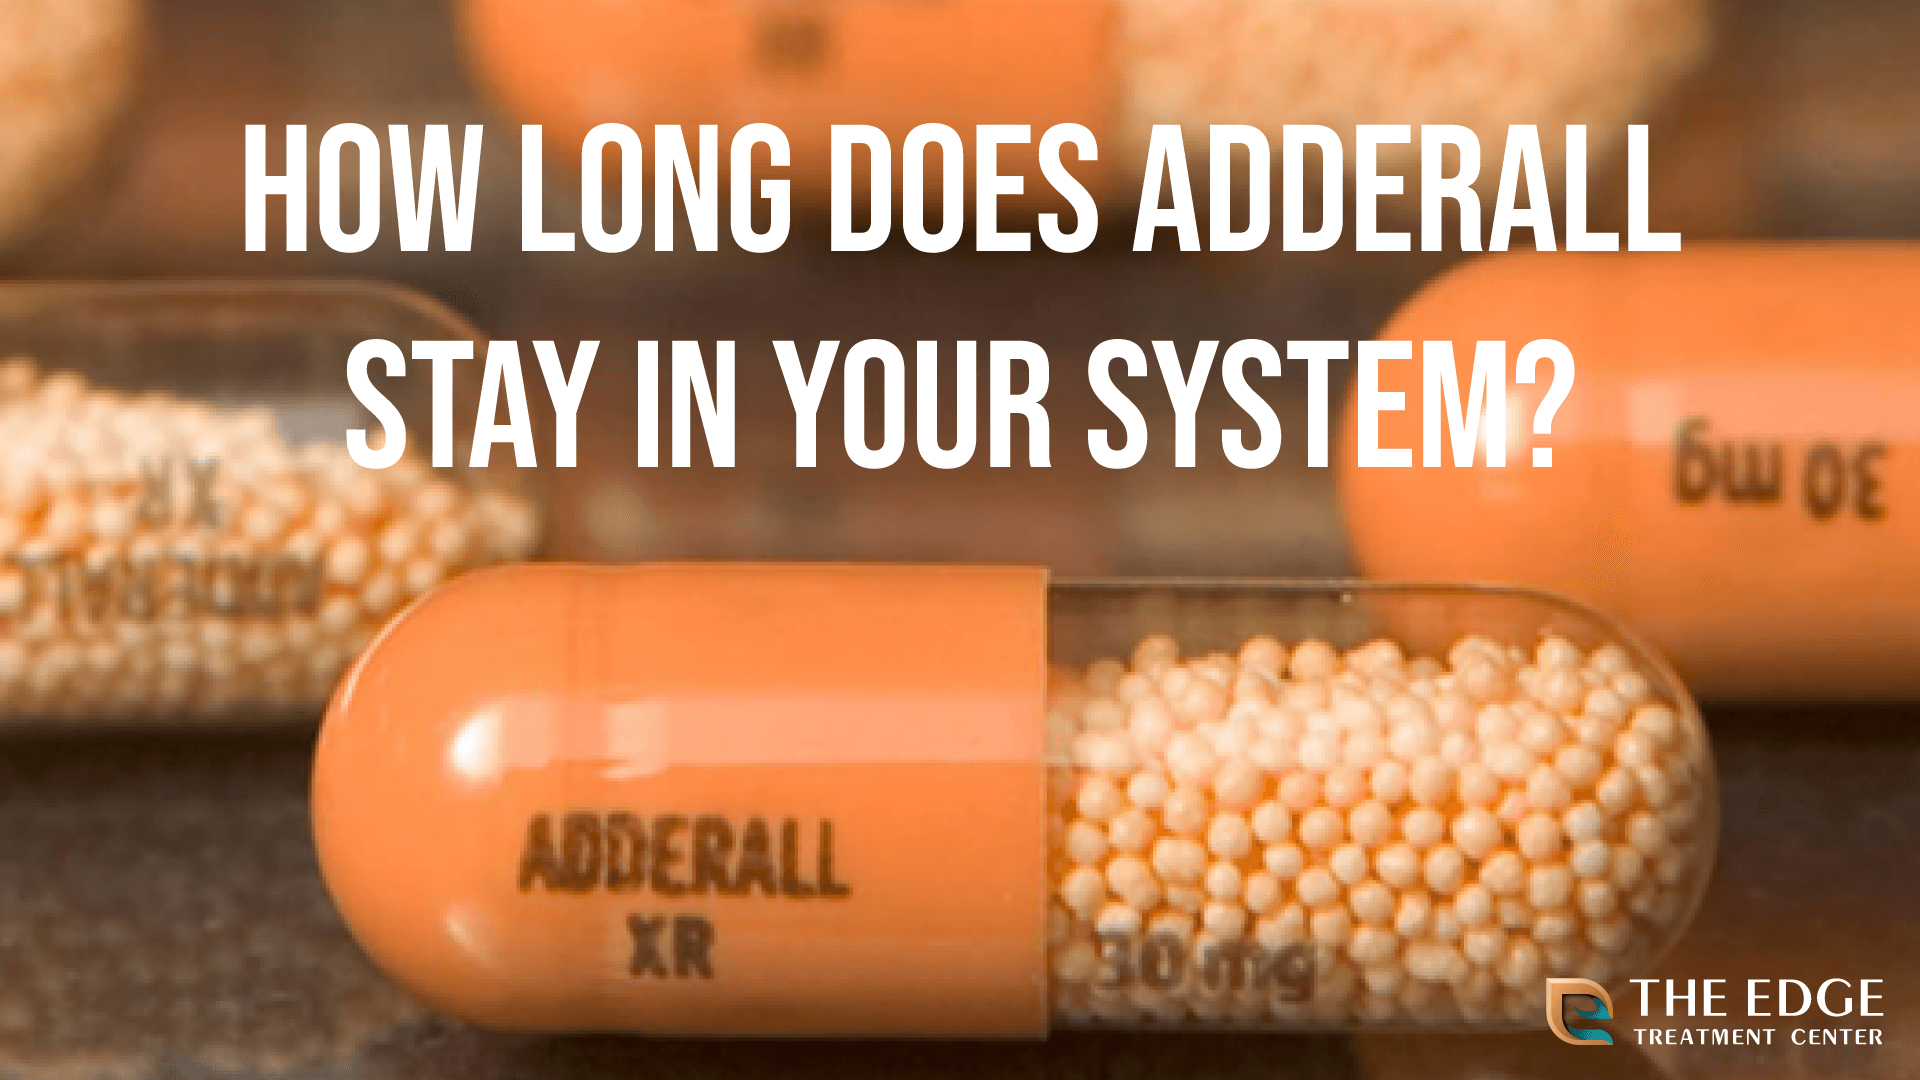 Modafinil Vs Adderall: Effectiveness And Safety